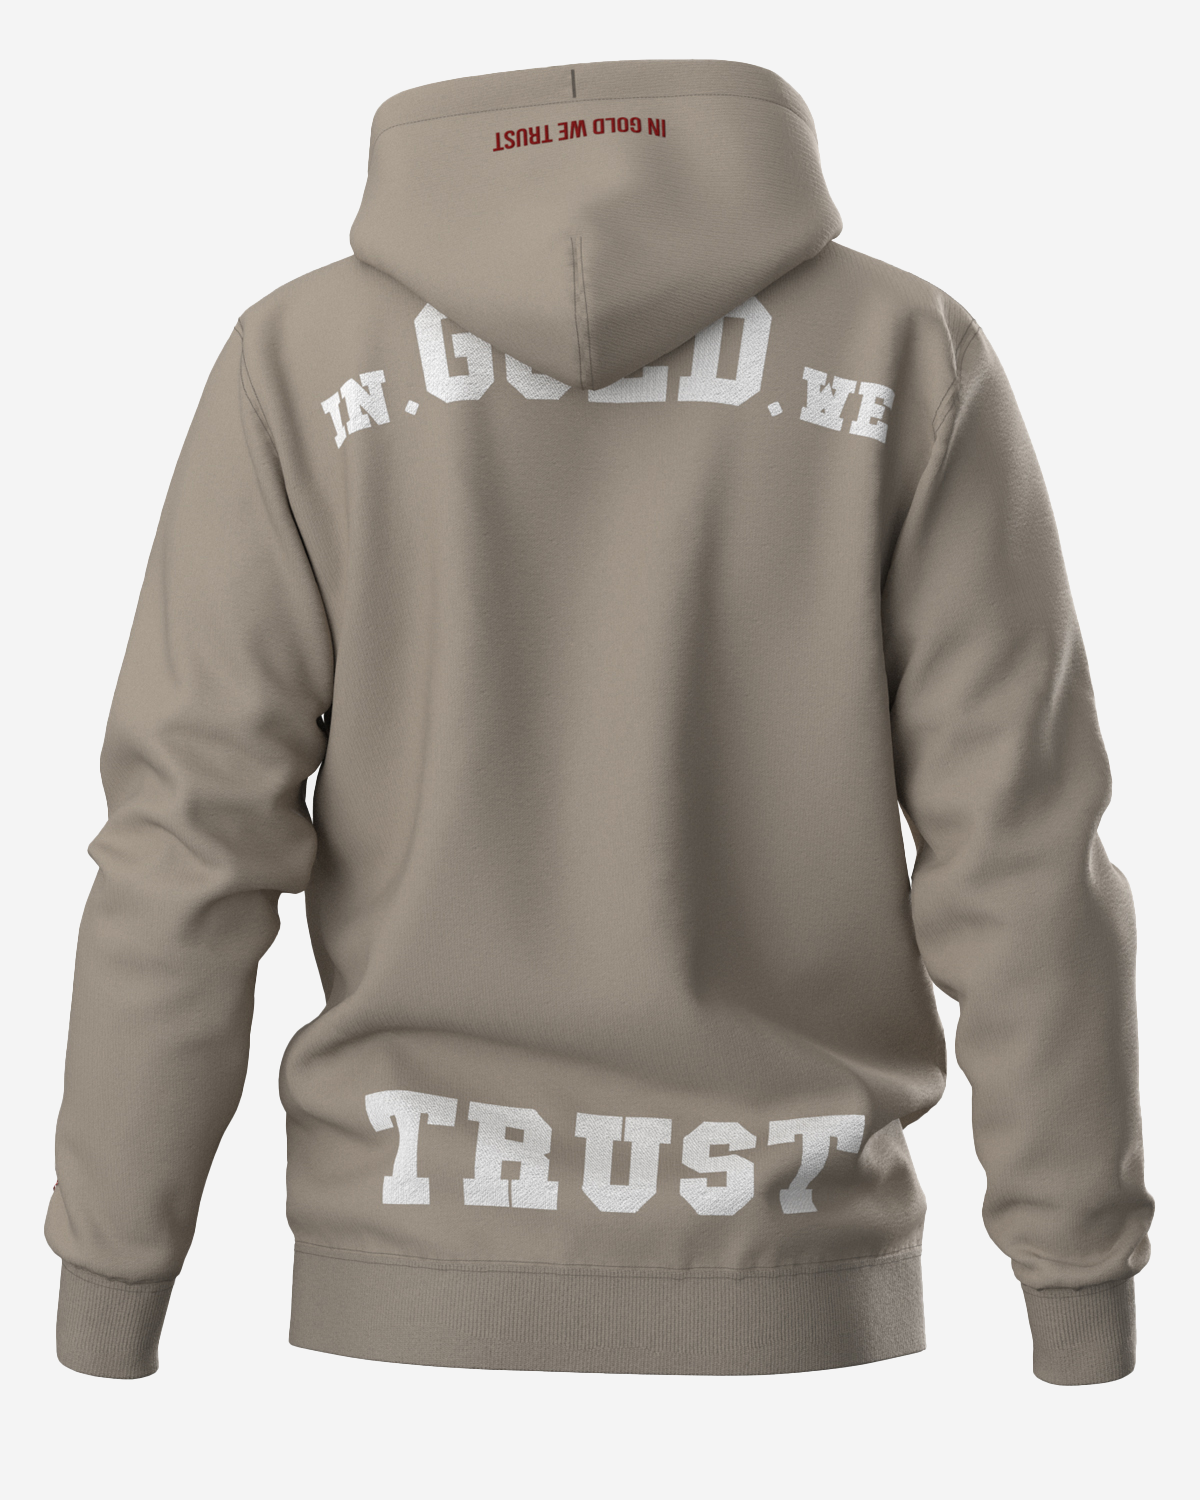 In Gold We Trust Hoodie The Notorious Pure Cashmere